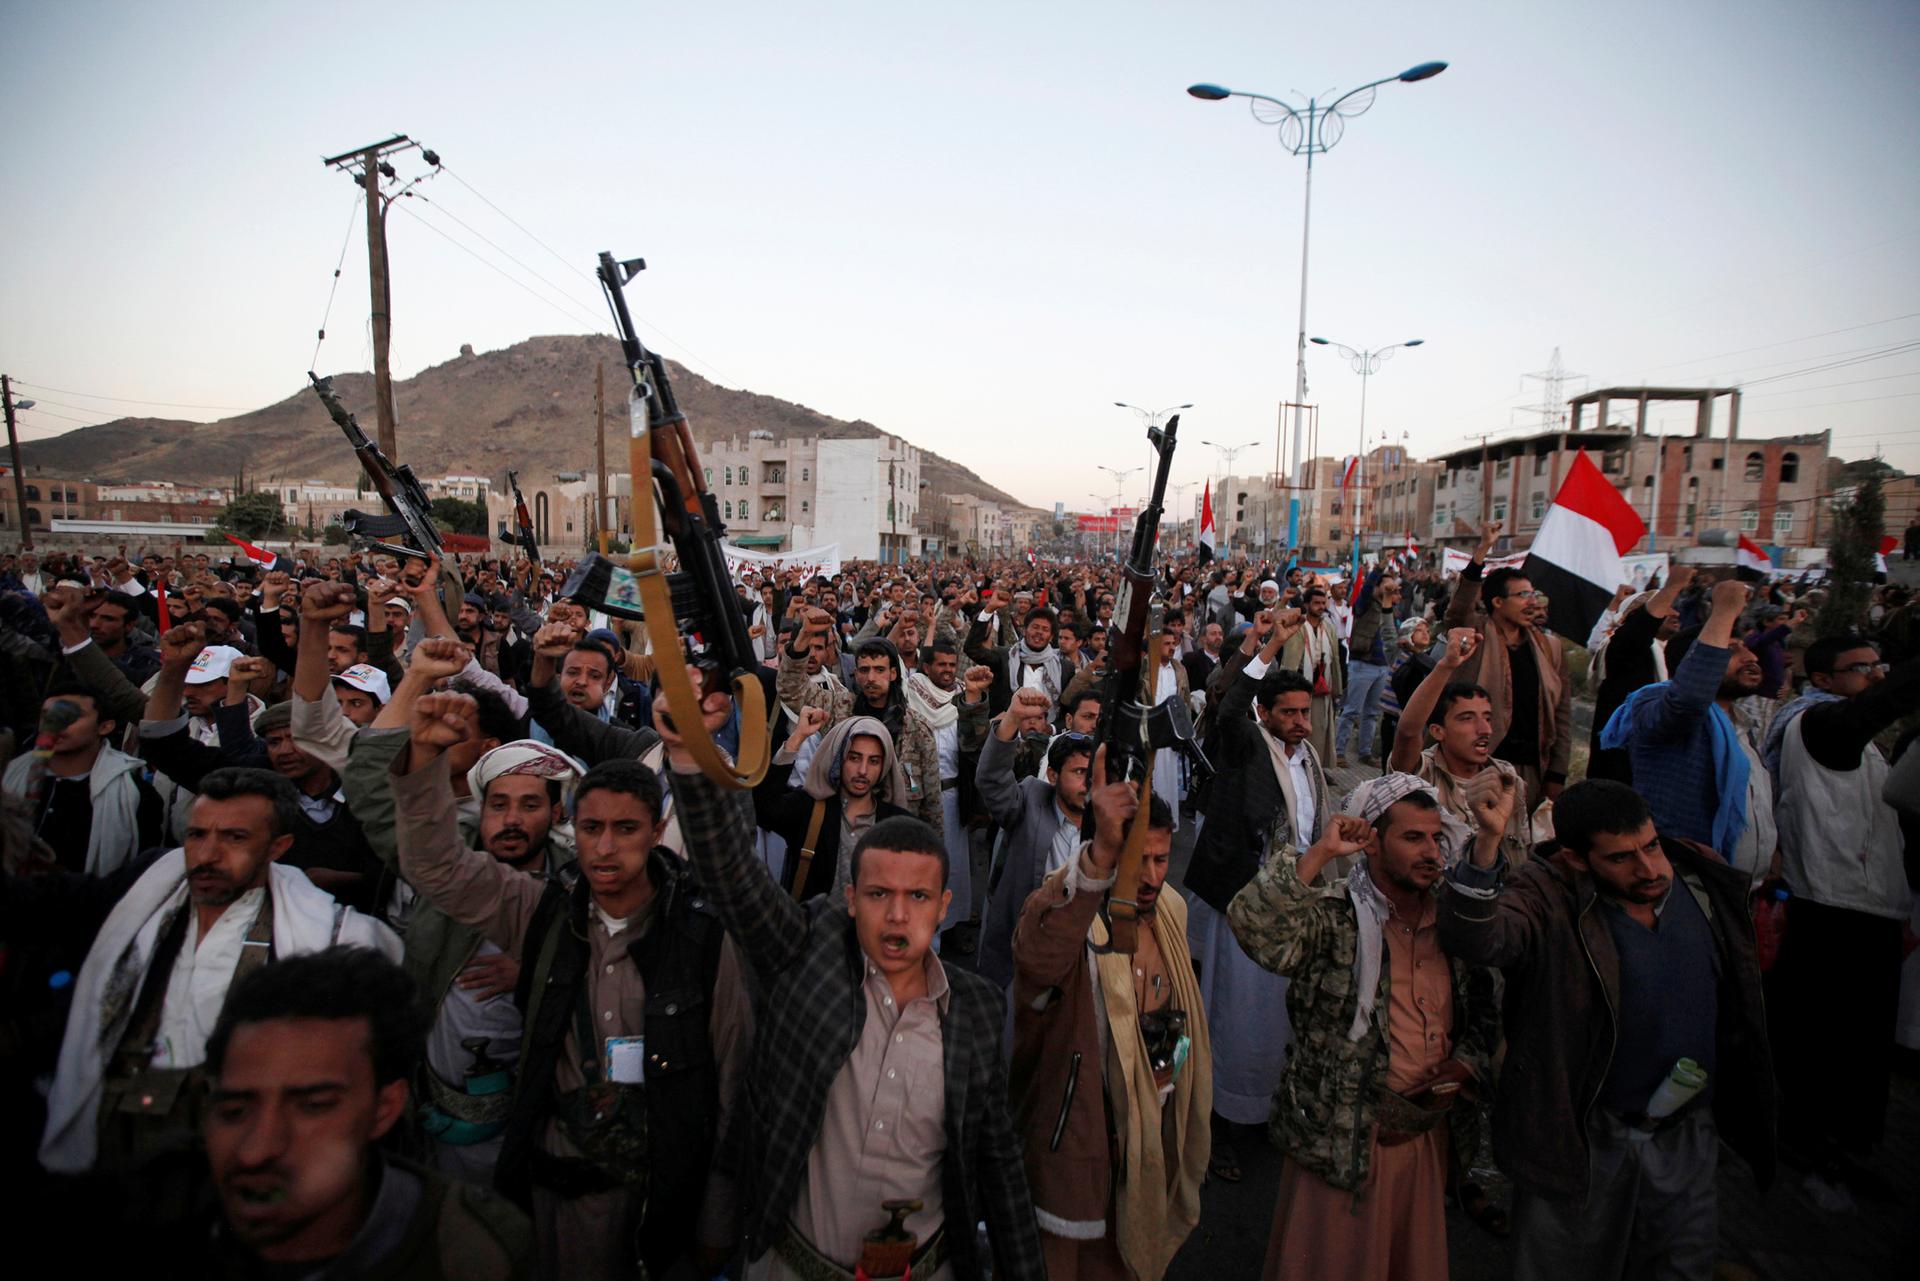 Followers of the Shi'ite Houthi movement shout slogans as they attend a rally